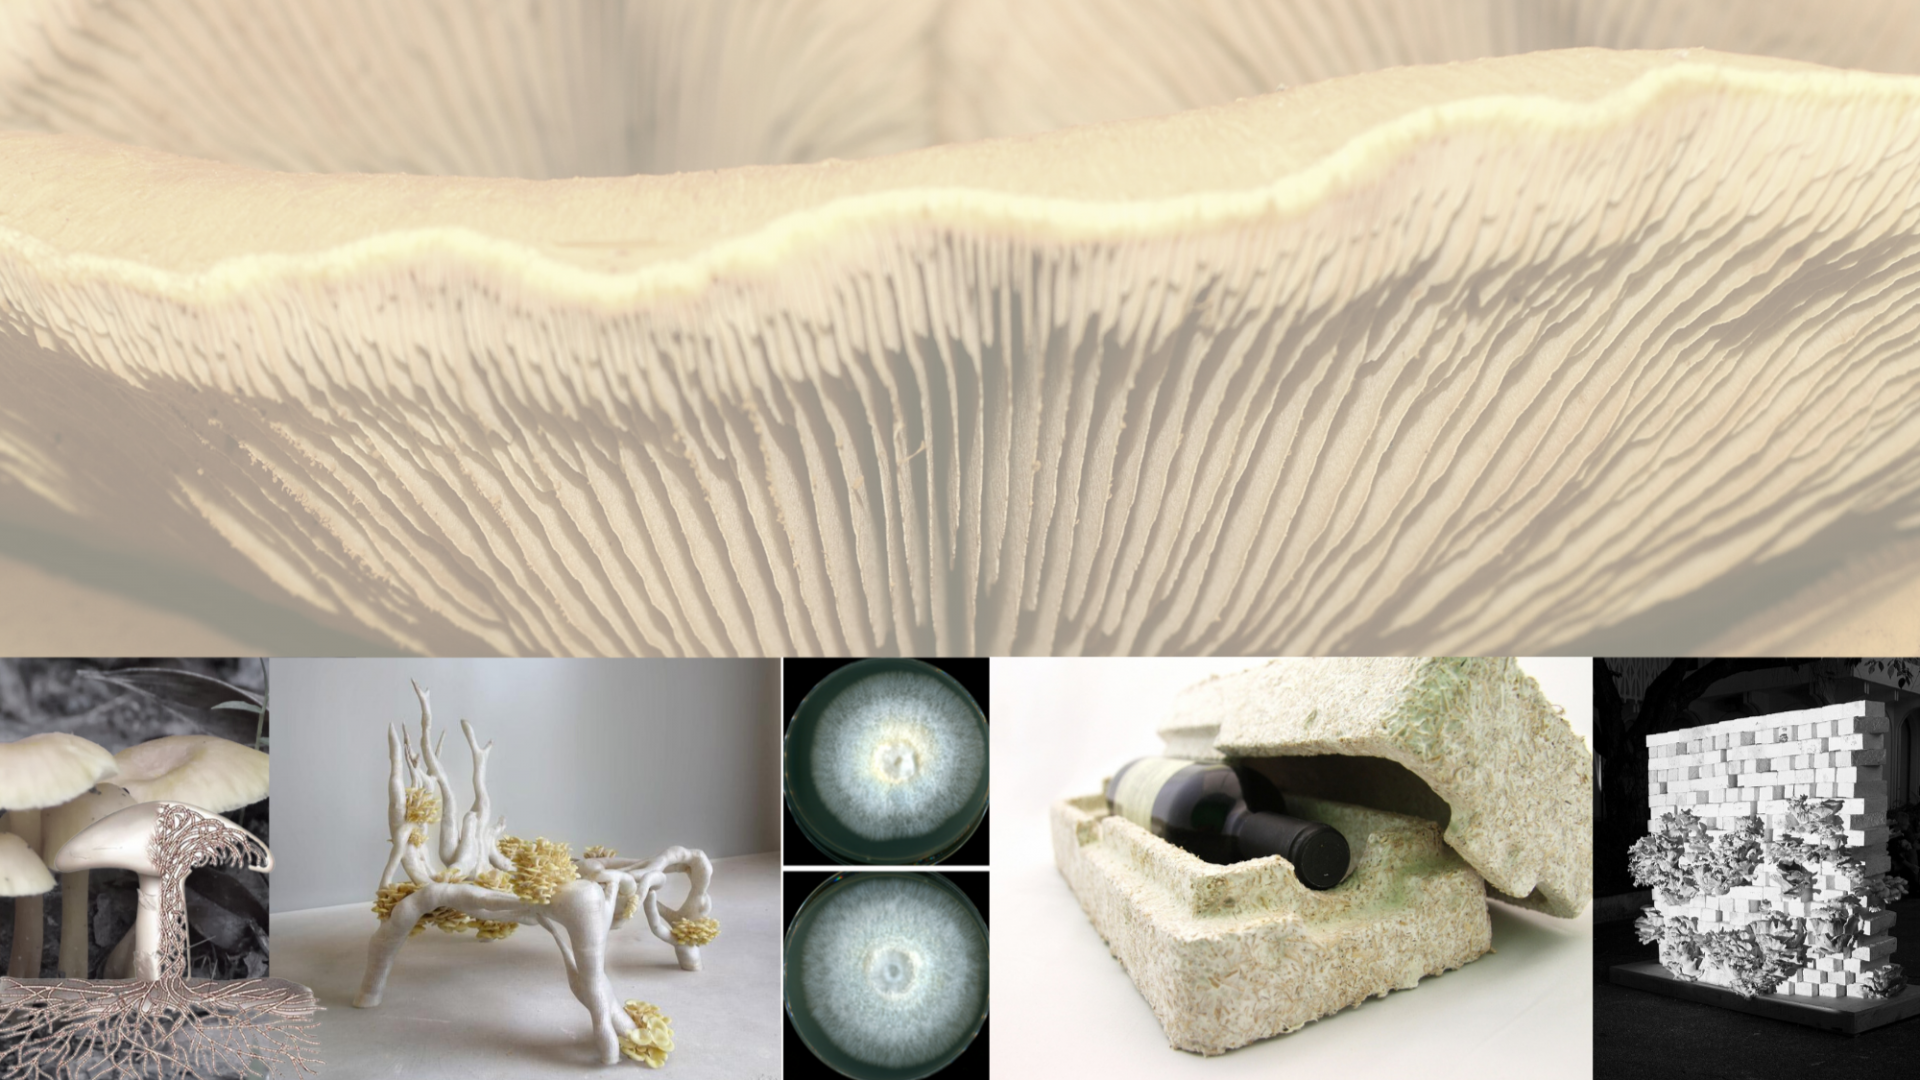 background image of a large white mushroom. In front is an image of a dissected mushroom, a white spindly figure with tufts of yellow growth, 2 circular shaped spores, an organic wine holder and a black and white image of growths from a blocked wall structure